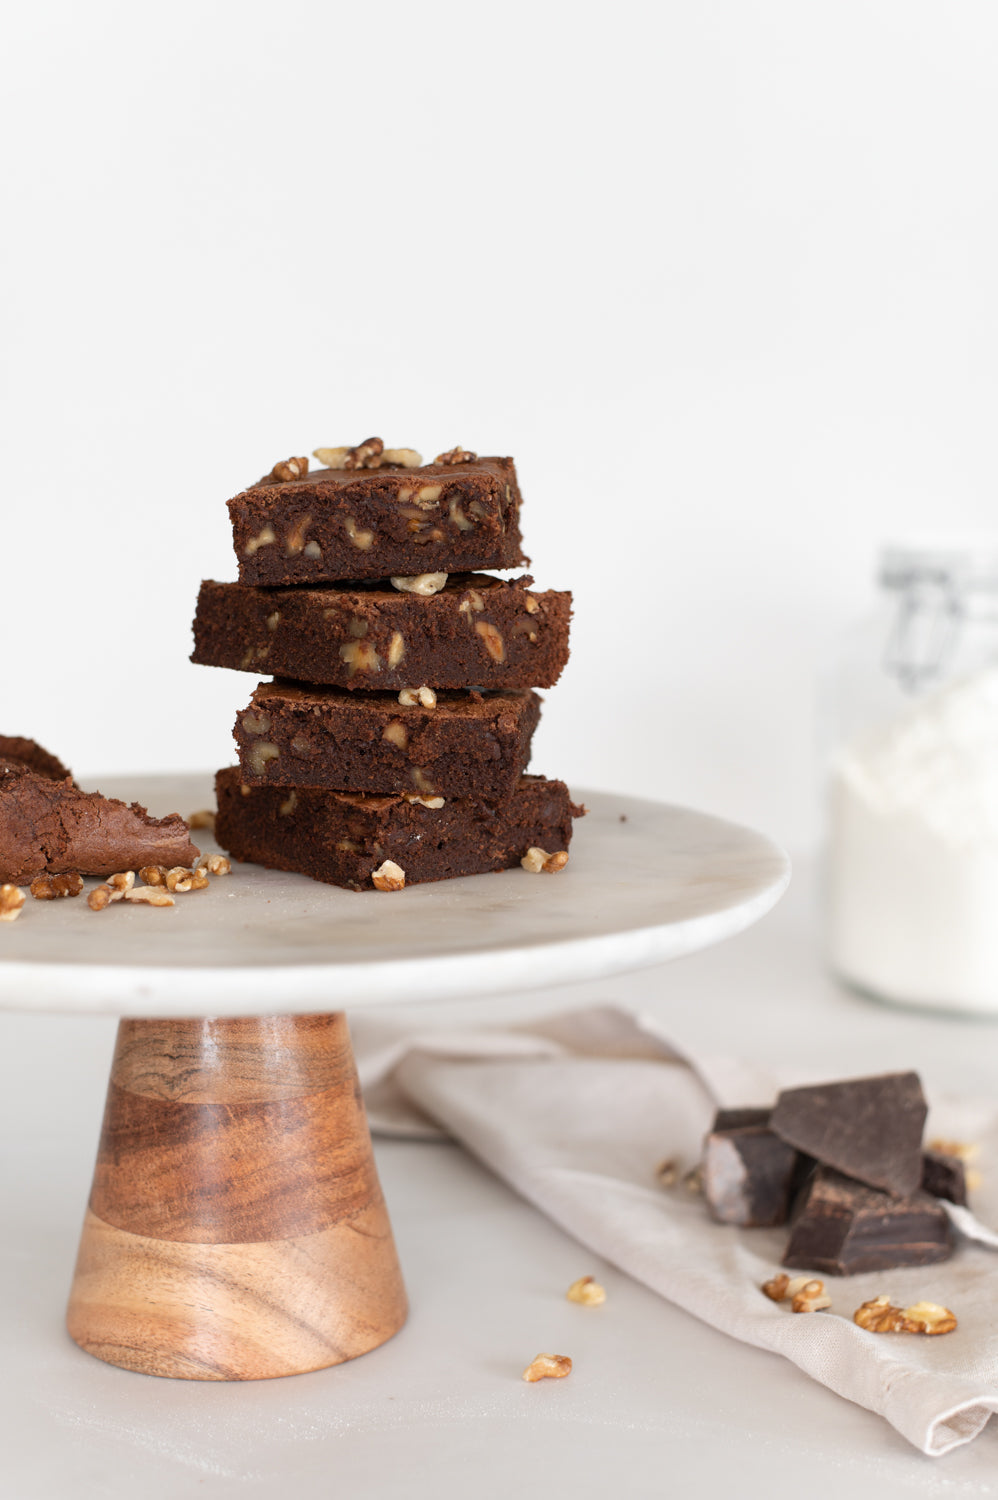 A stack of chocolate and walnut brownies displayed on a cake stand